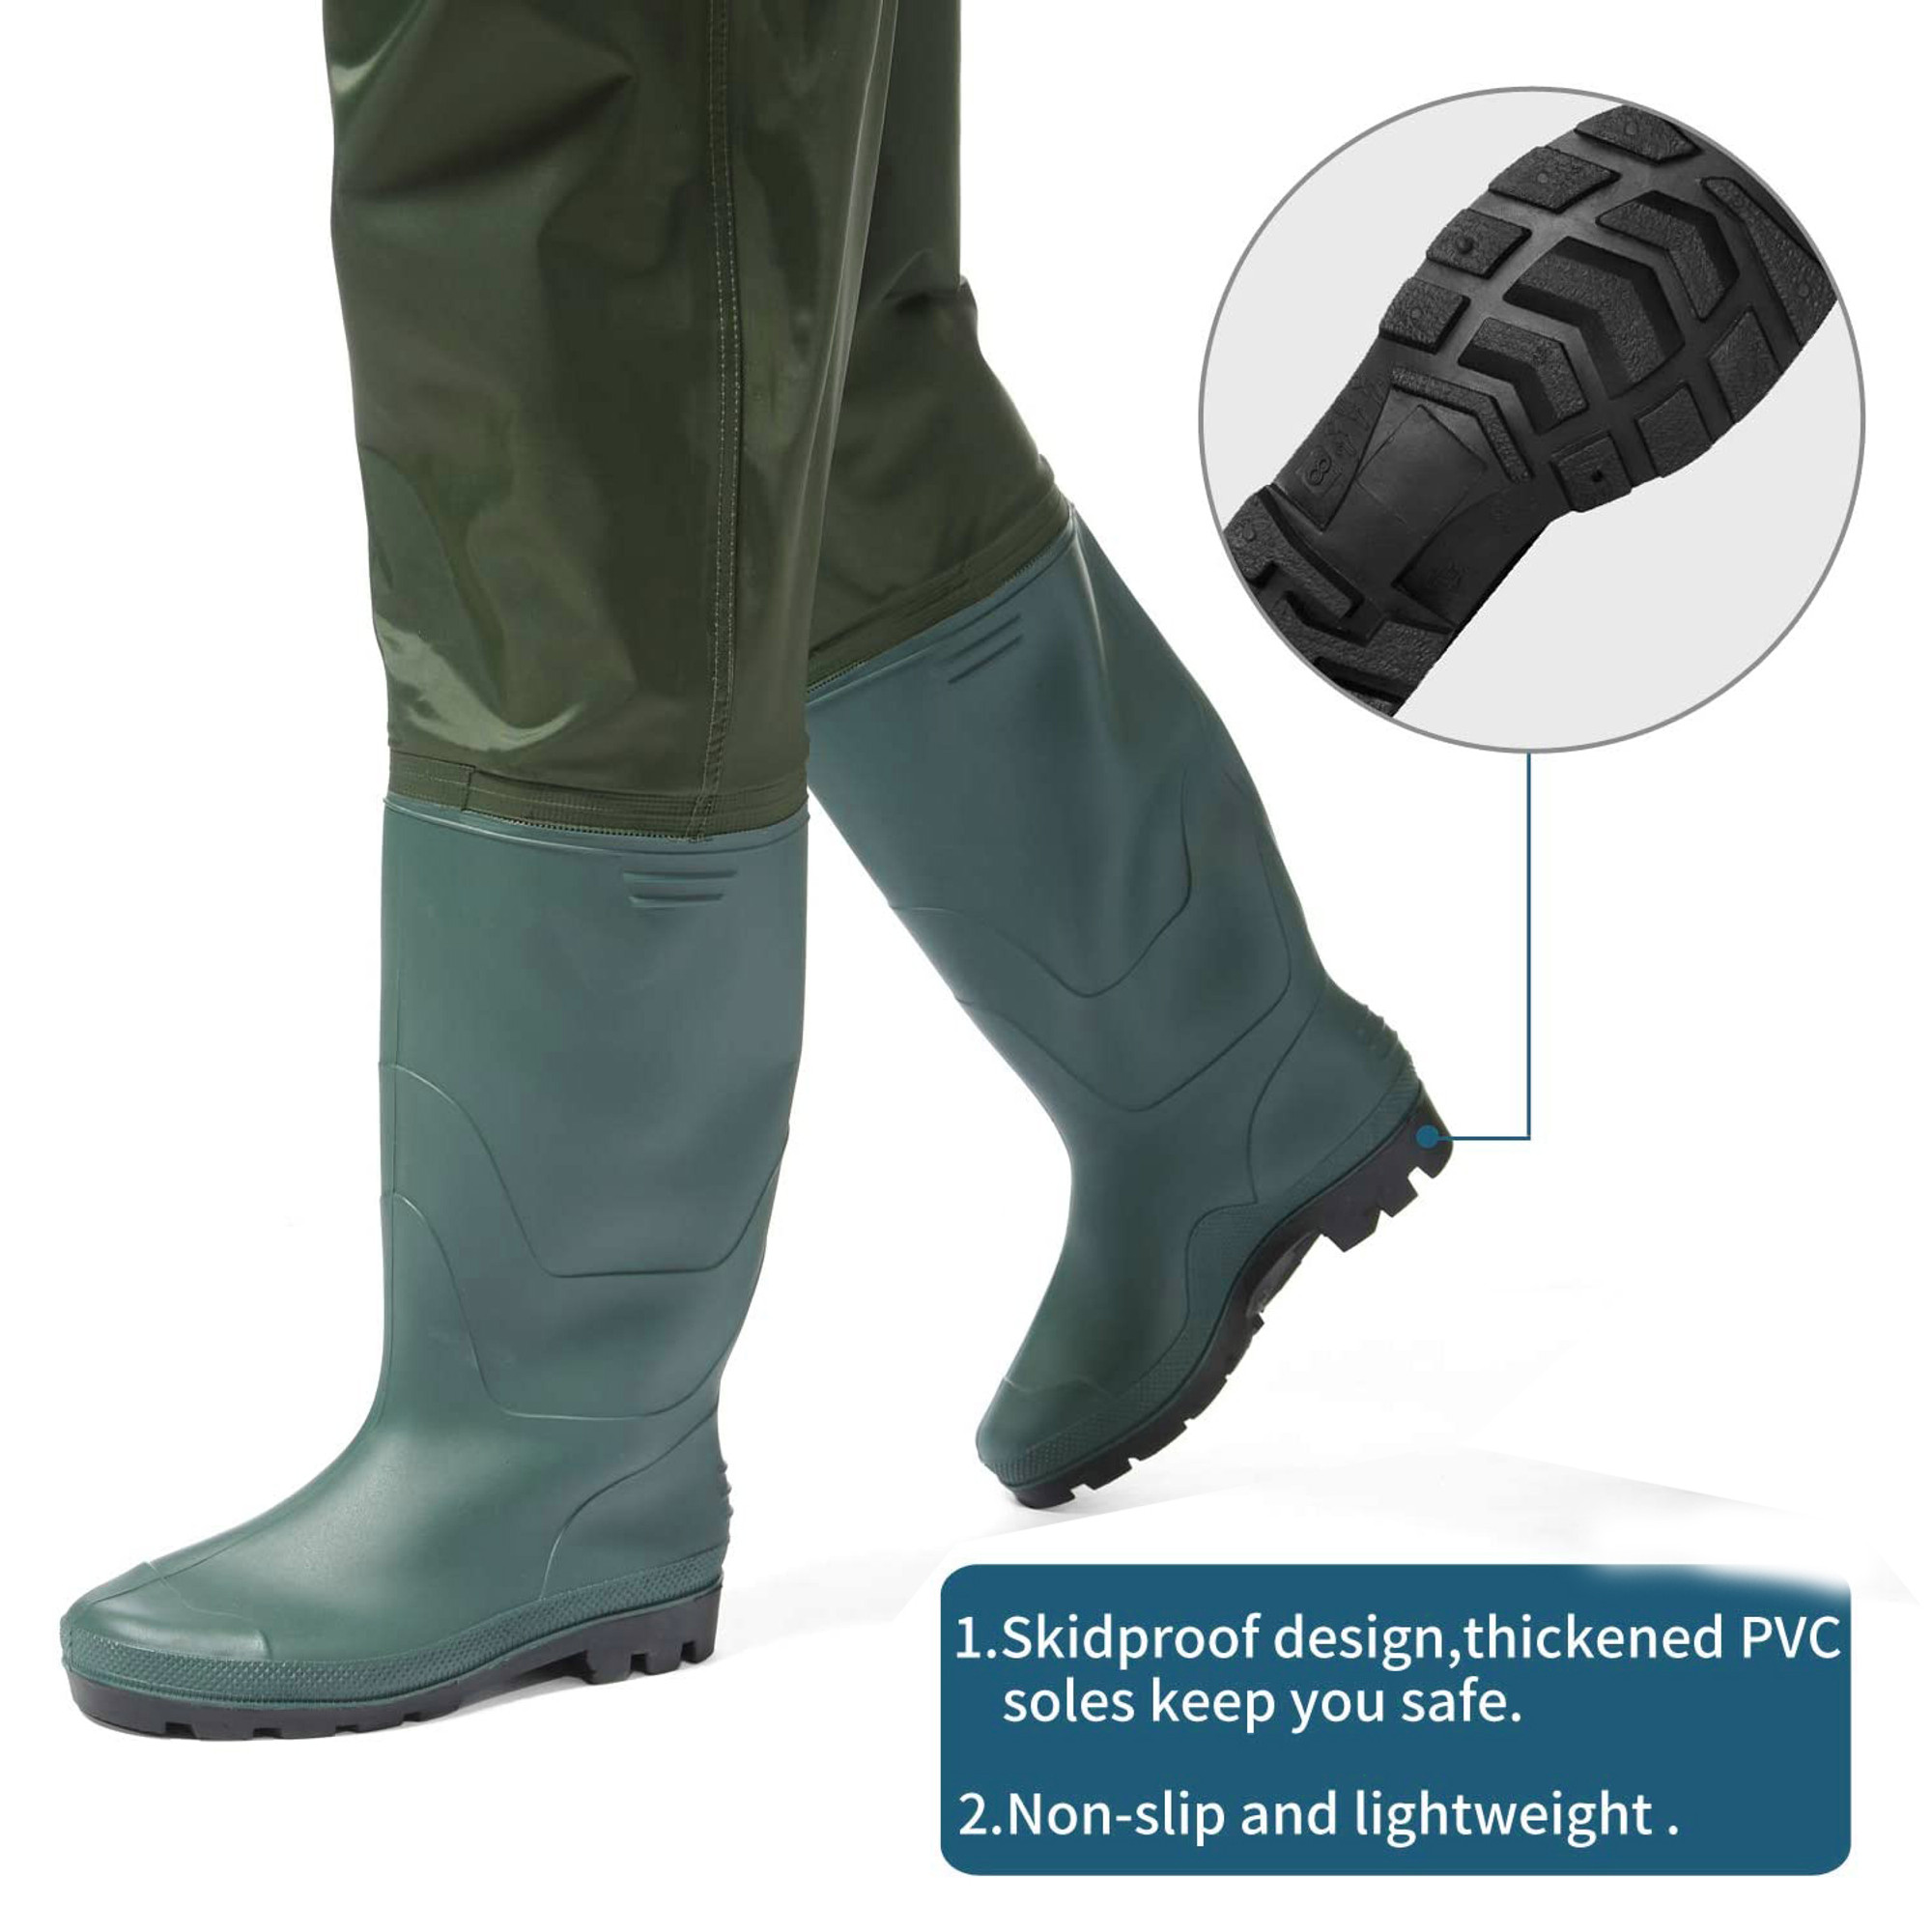 Fishing Waders With Boots And Lightweight Pants Waterproof For Men